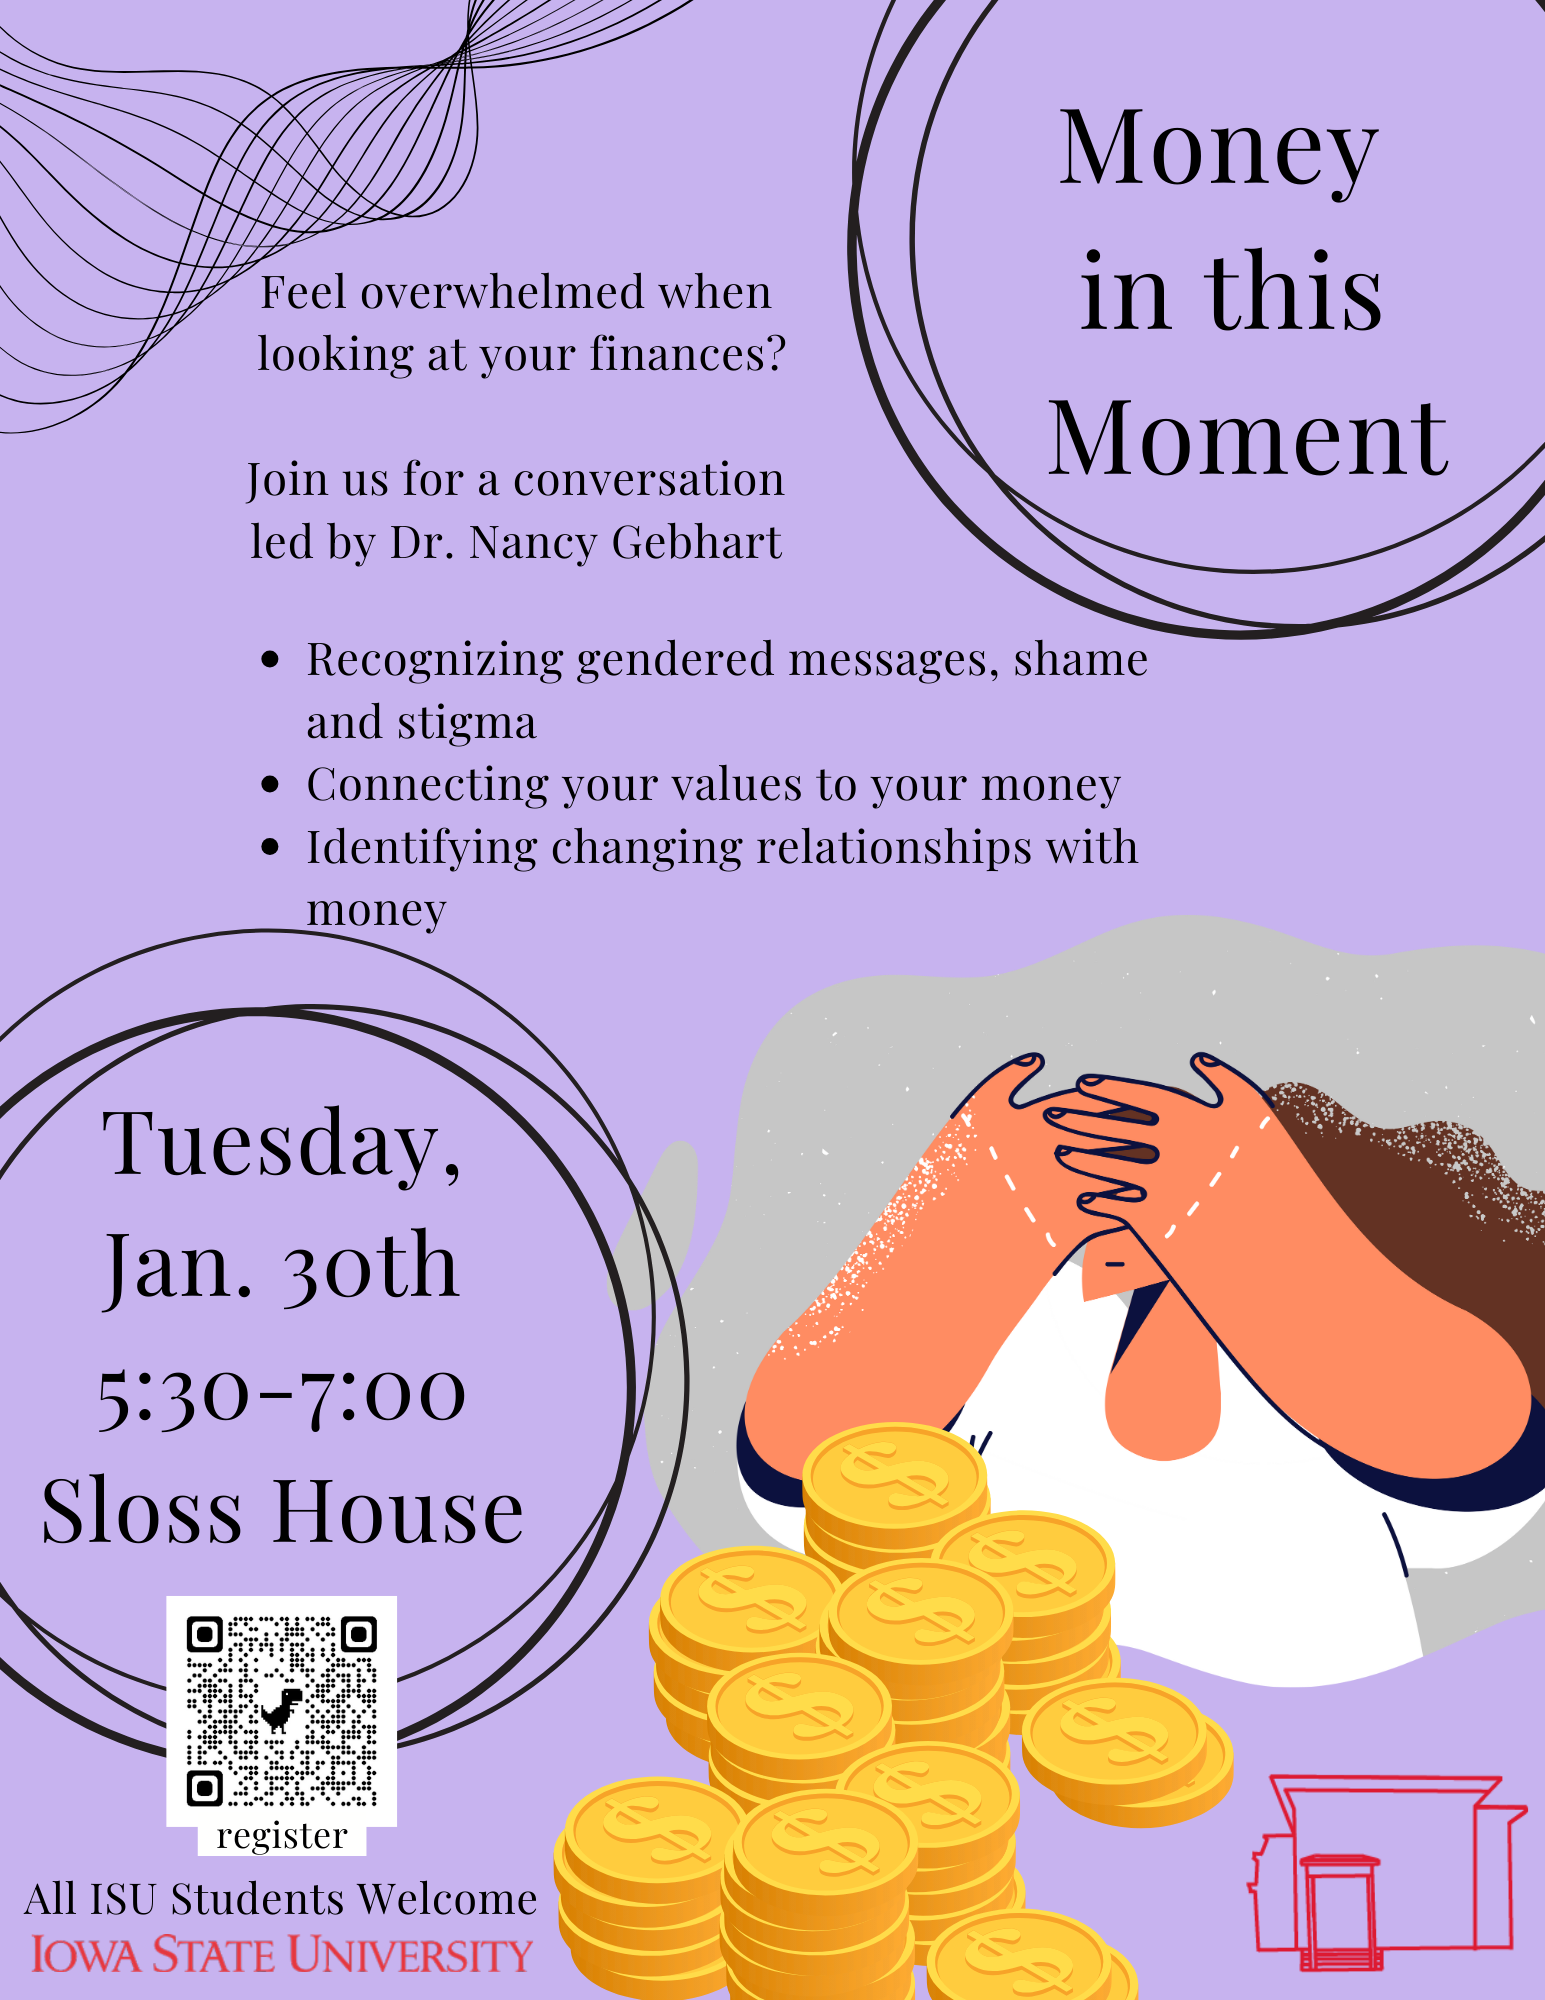 Money in the moment flyer